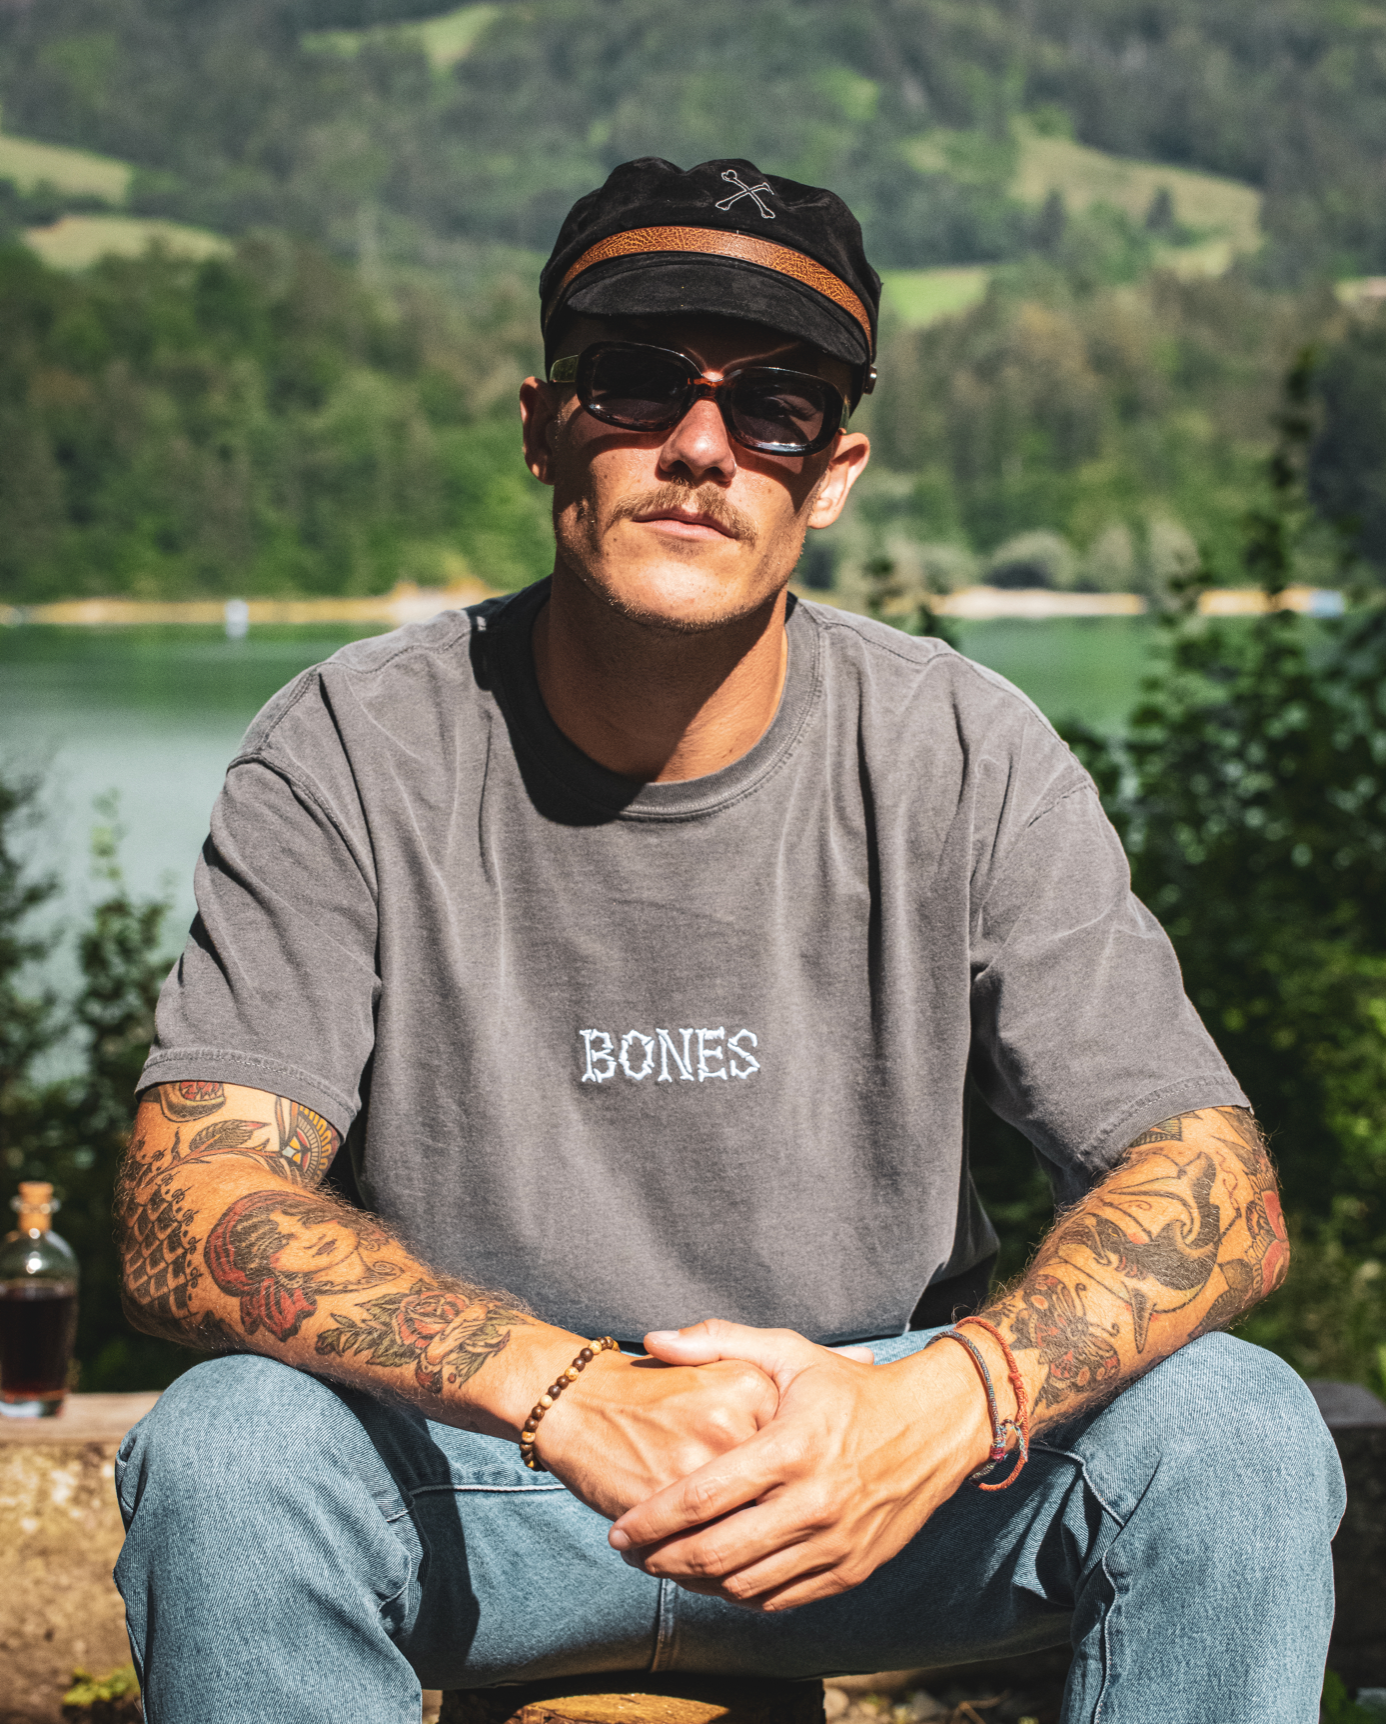 Bones Club Tee - Washed Out Black